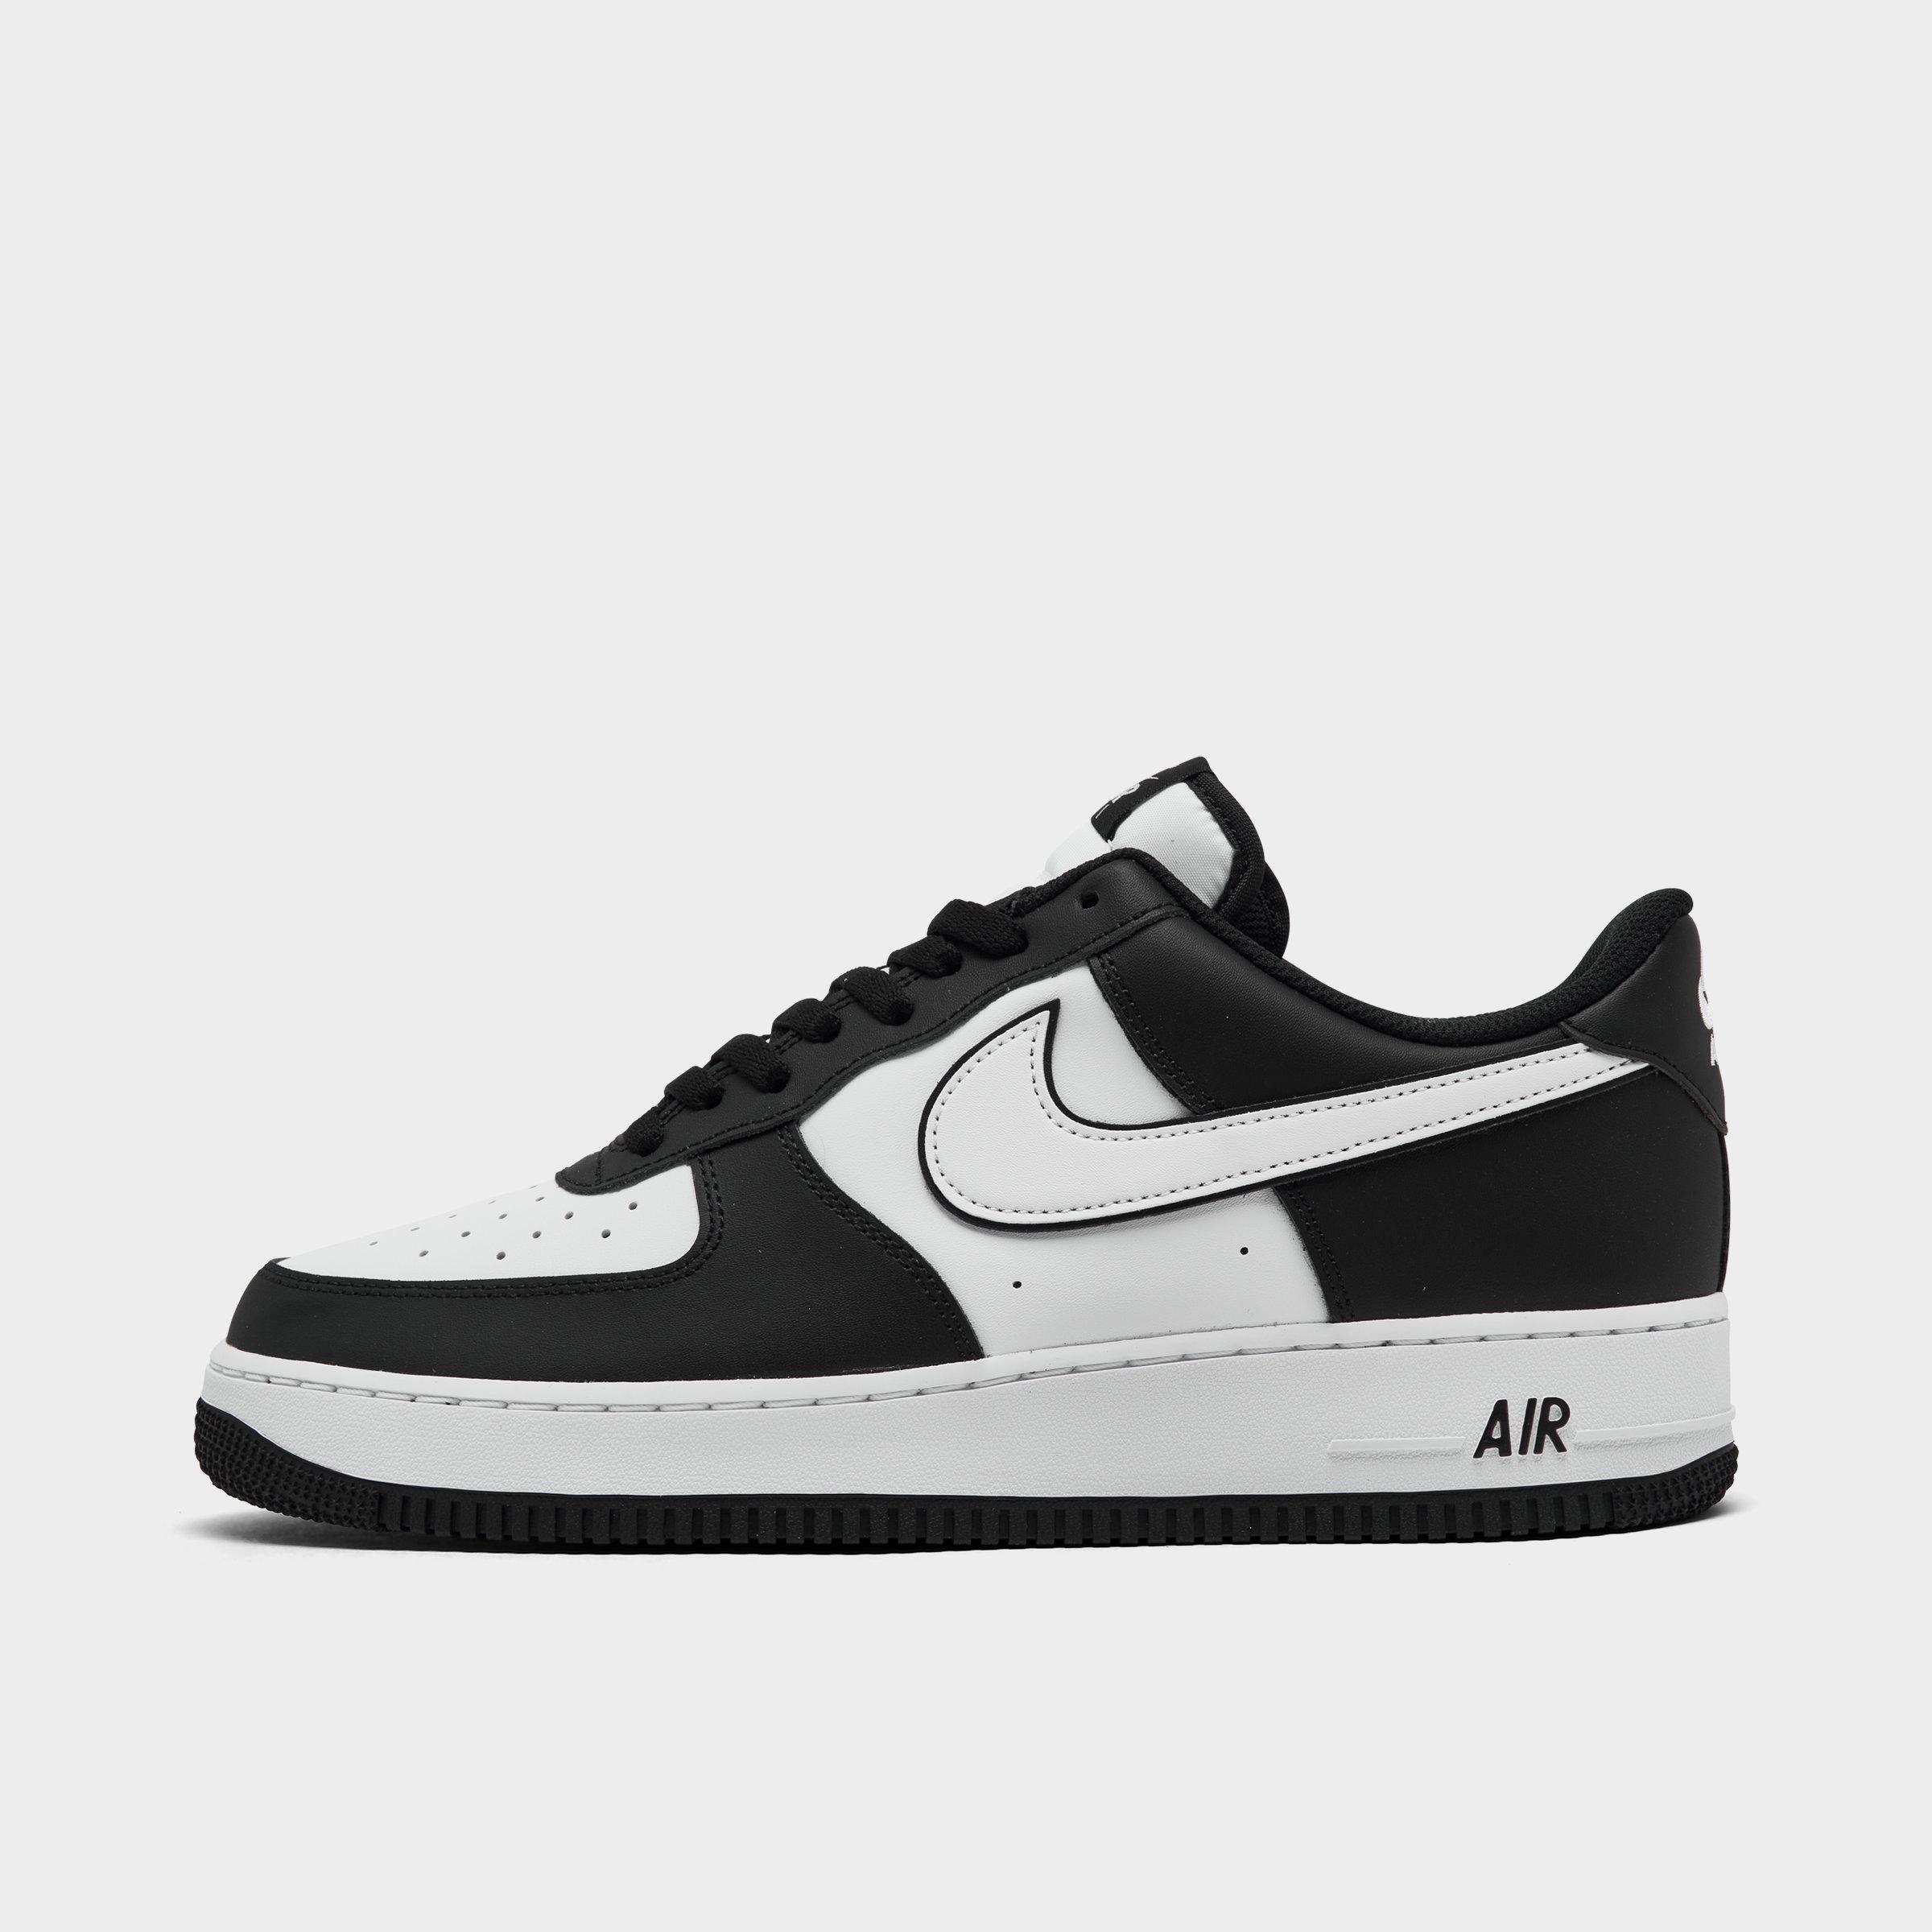 Nike Men's Air Force 1 Low Casual Shoes In Black/white/black